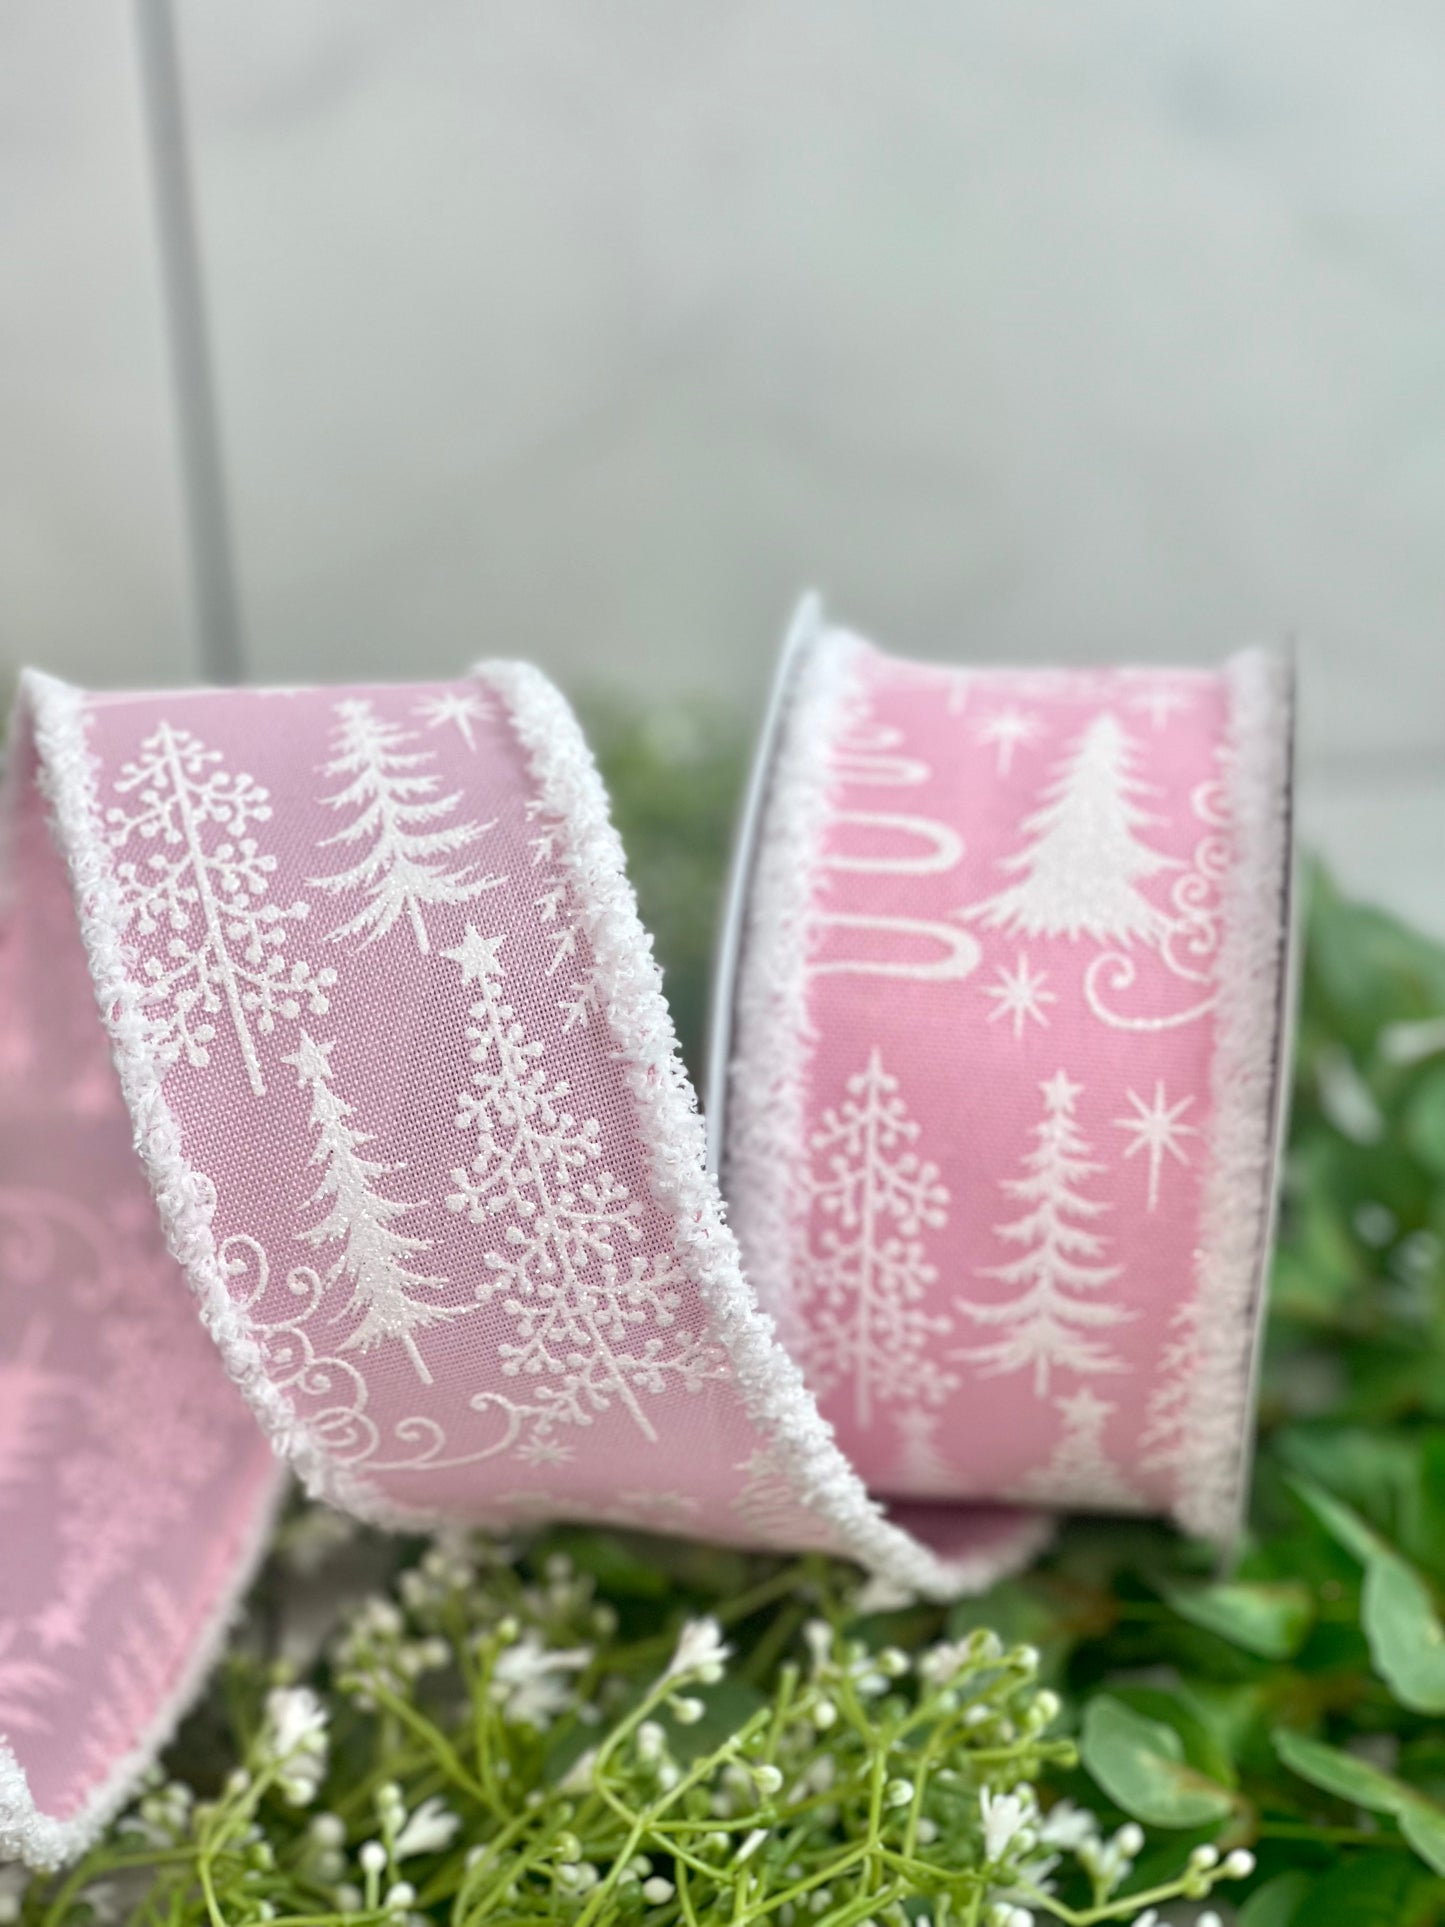 2.5 Inch Pink With White Trees Ribbon